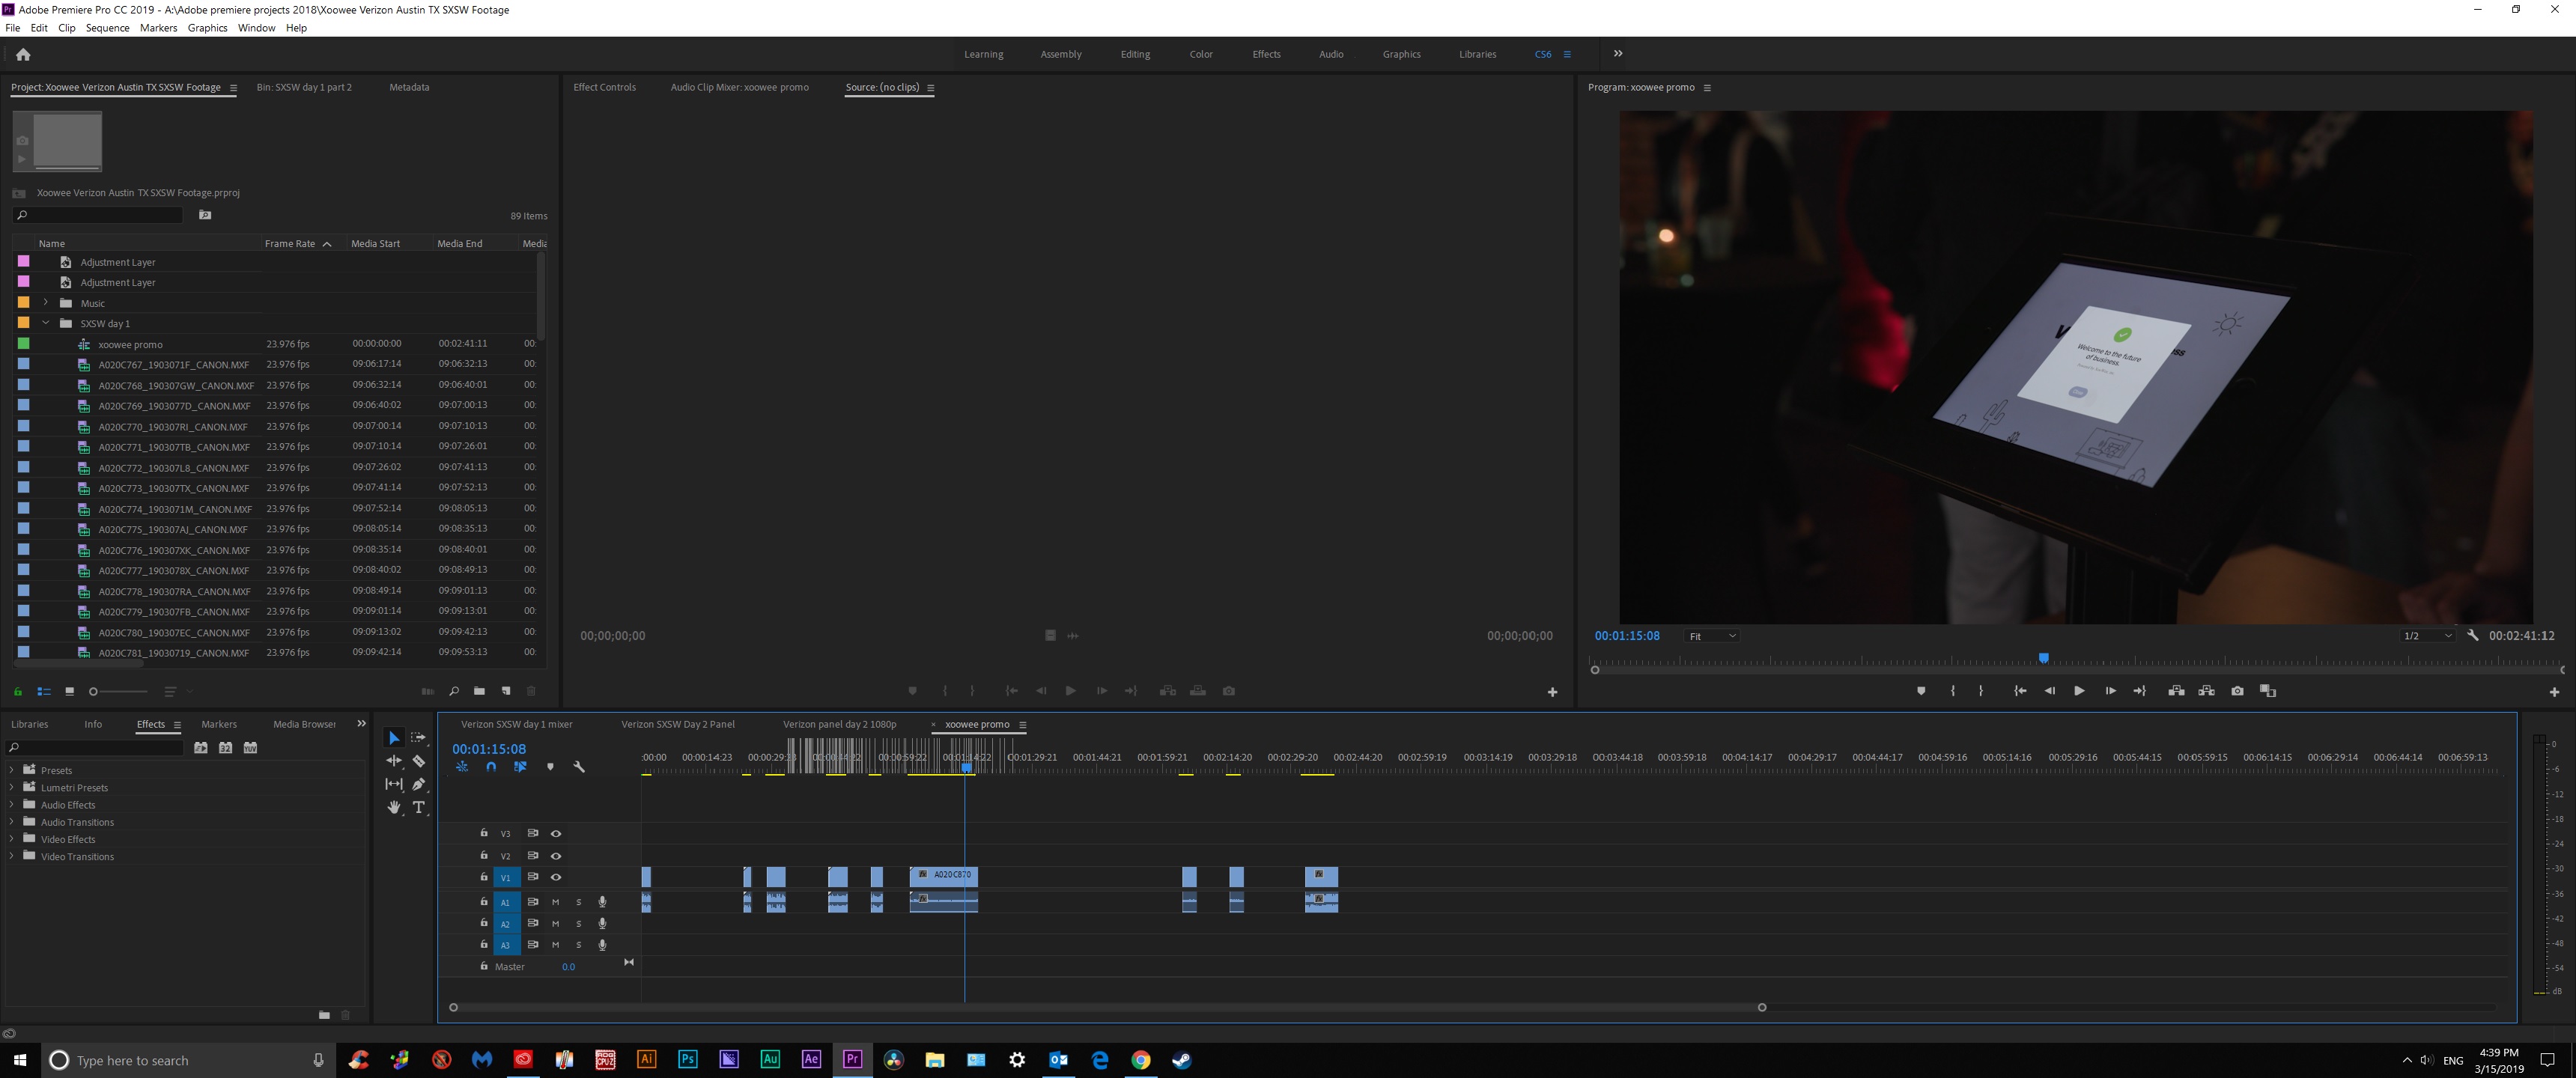 Adobe Premiere CC 2019 timeline and marker issues.jpg